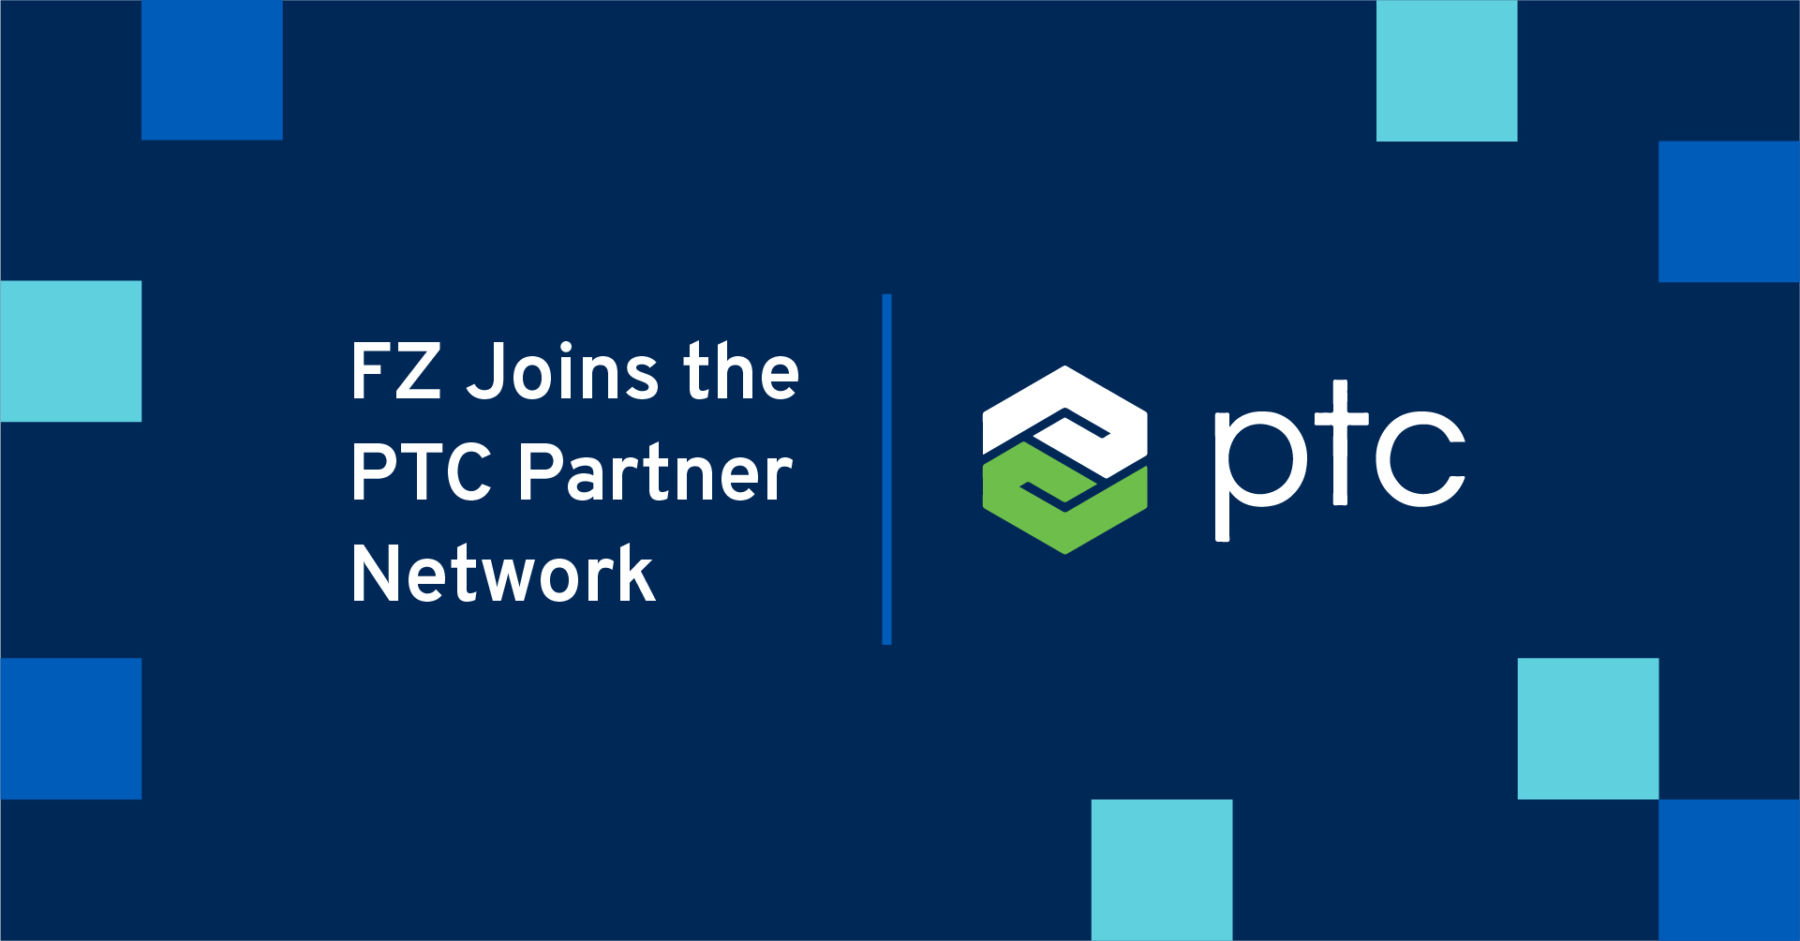 FZ joins the PTC Partner Network and their Industrial IoT solutions